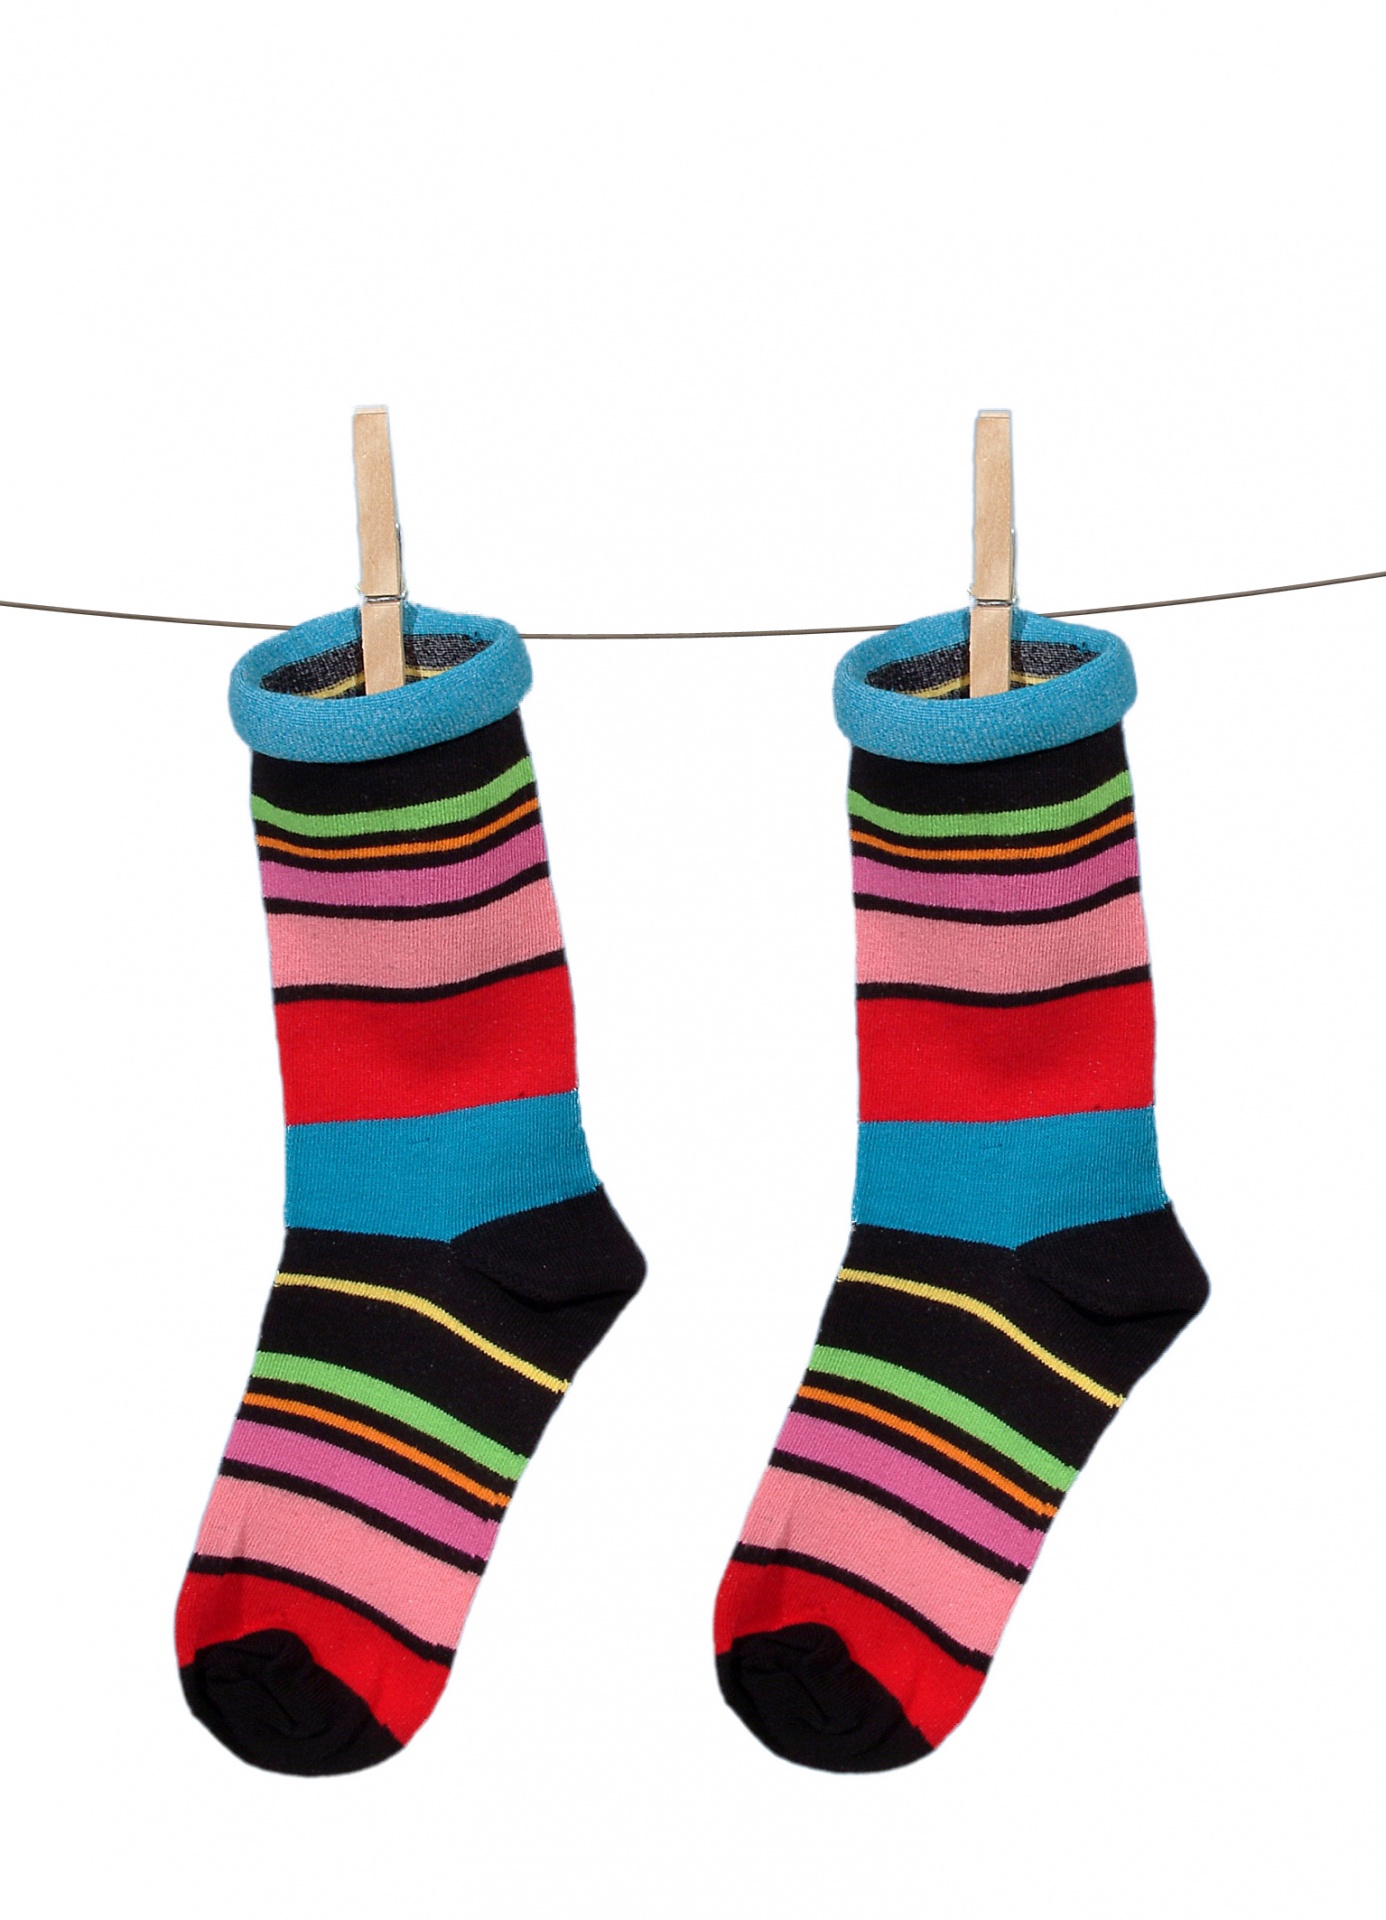 Striped colorful socks on line isolated on white background